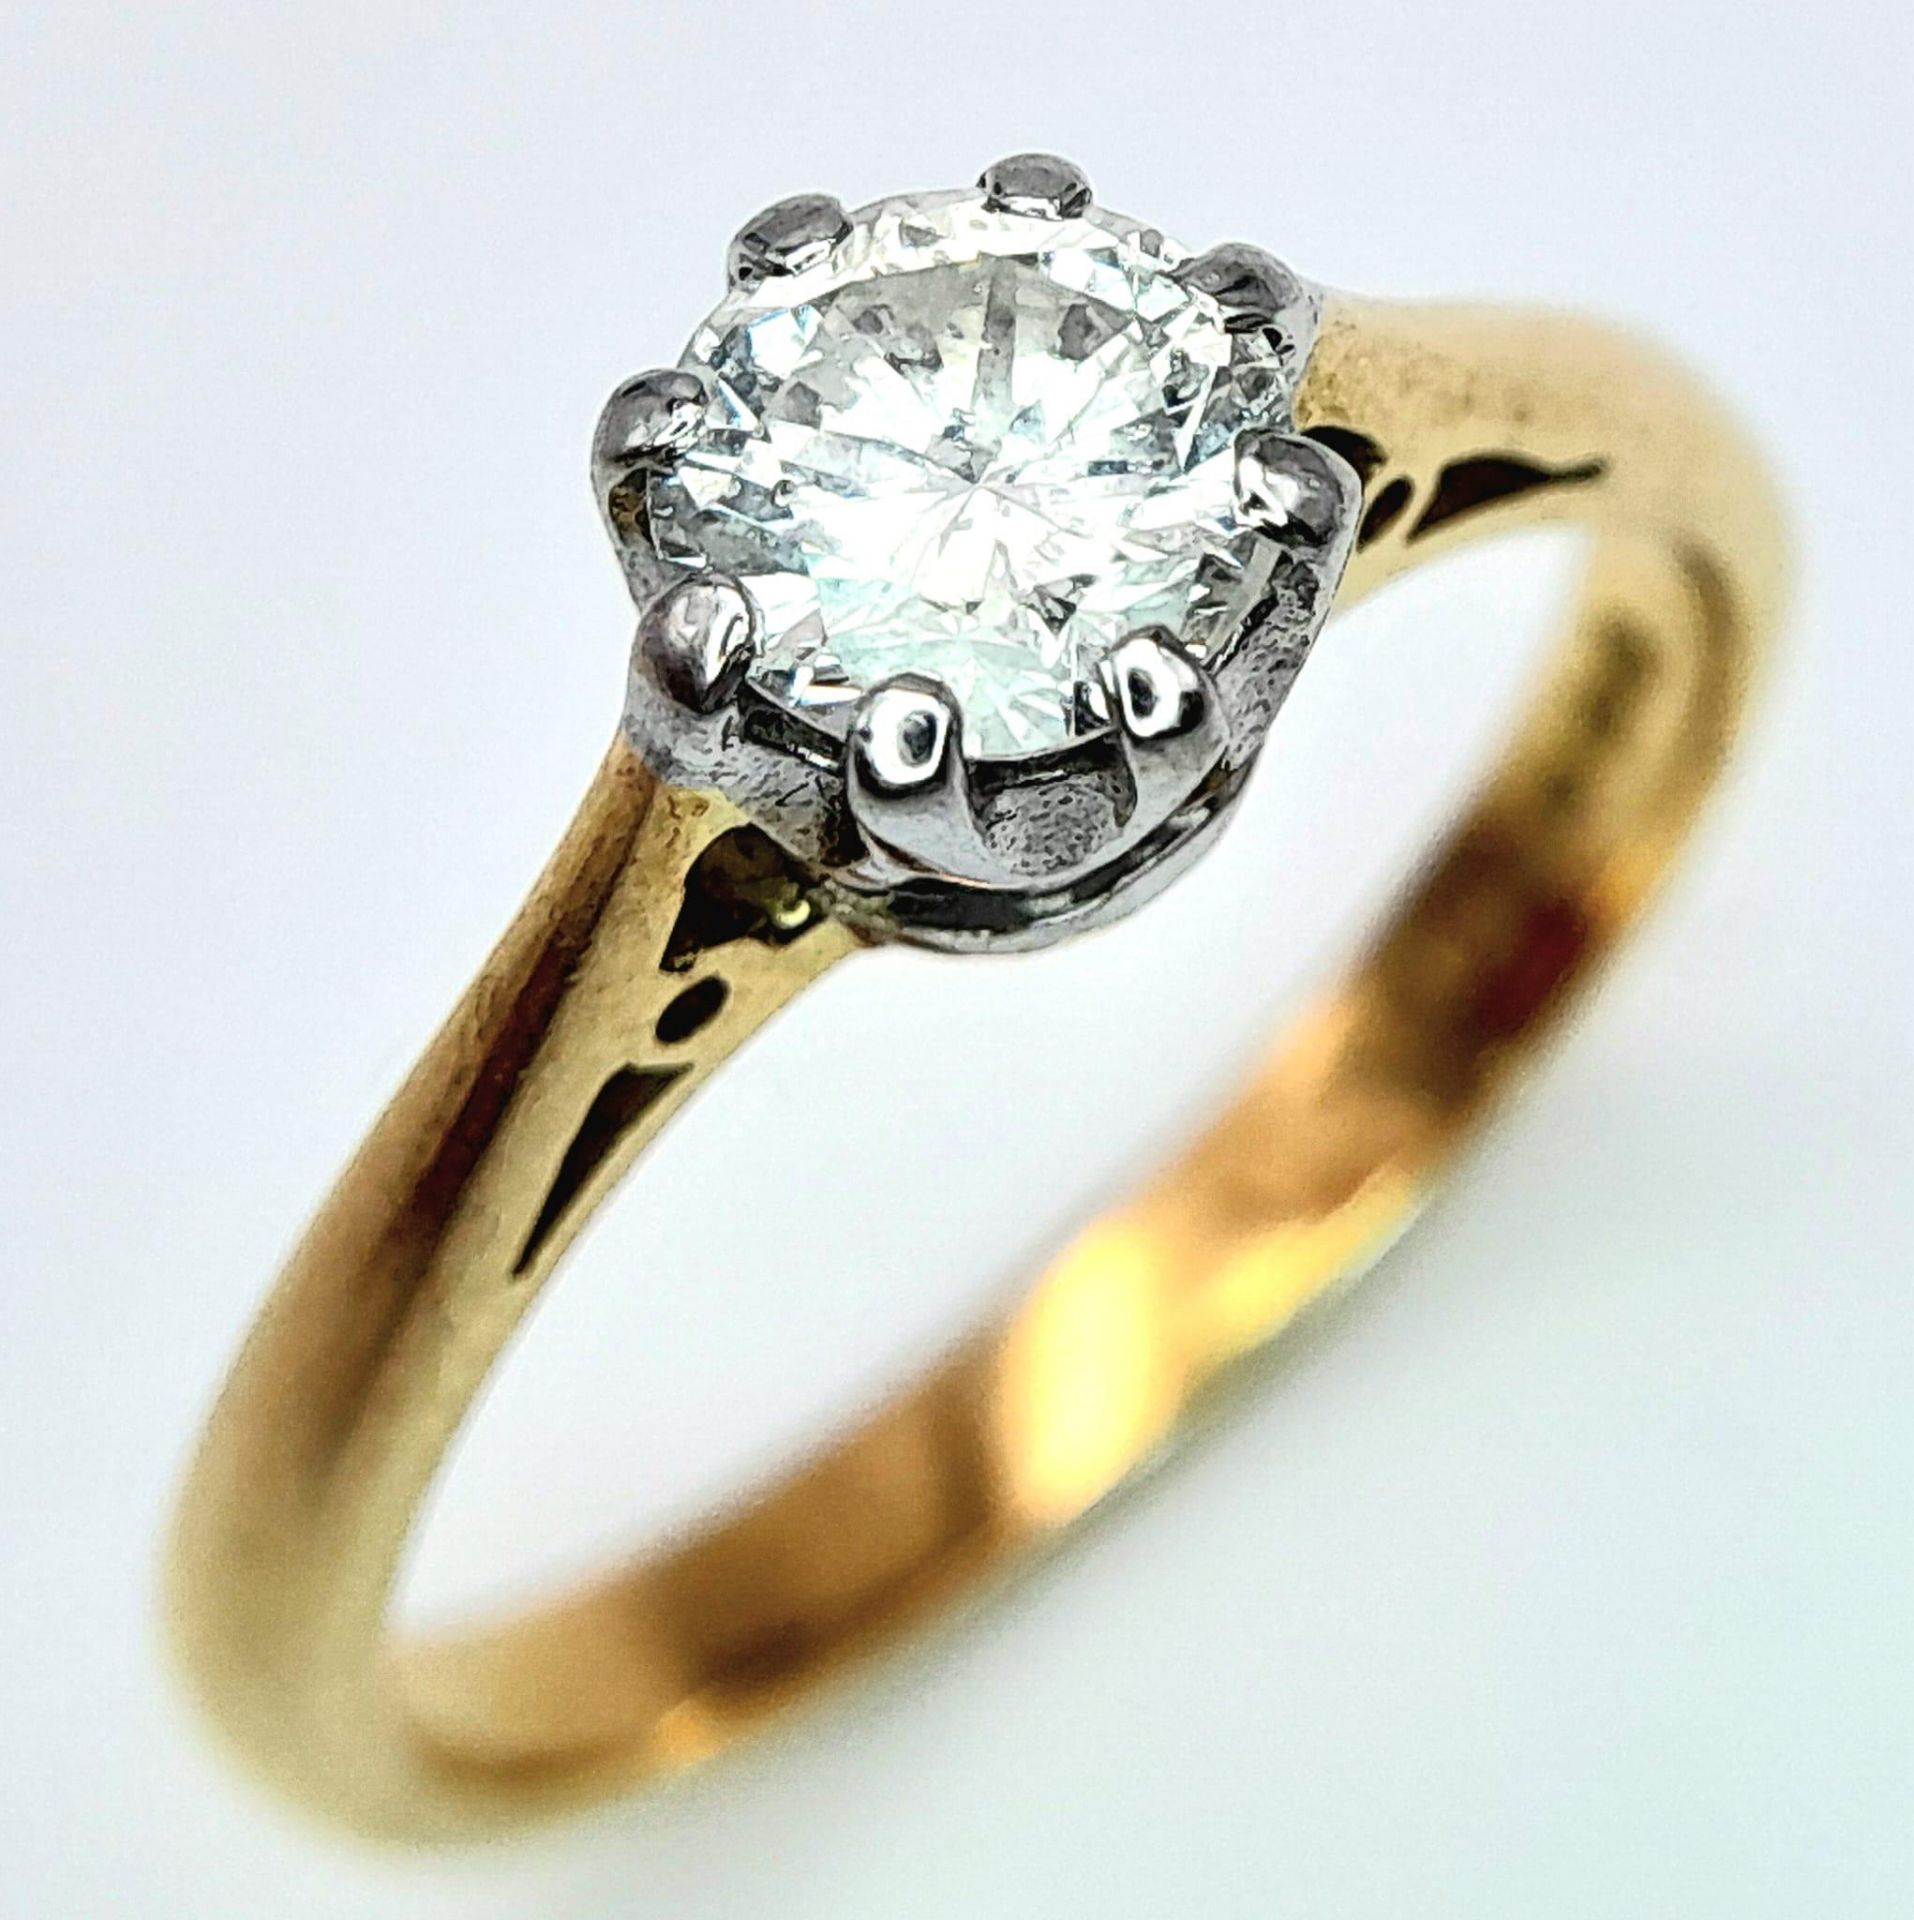 AN 18K YELLOW GOLD DIAMOND SOLITAIRE RING - 0.65CT. 8 CLAW SETTING. 3.4G. SIZE L. - Image 3 of 5